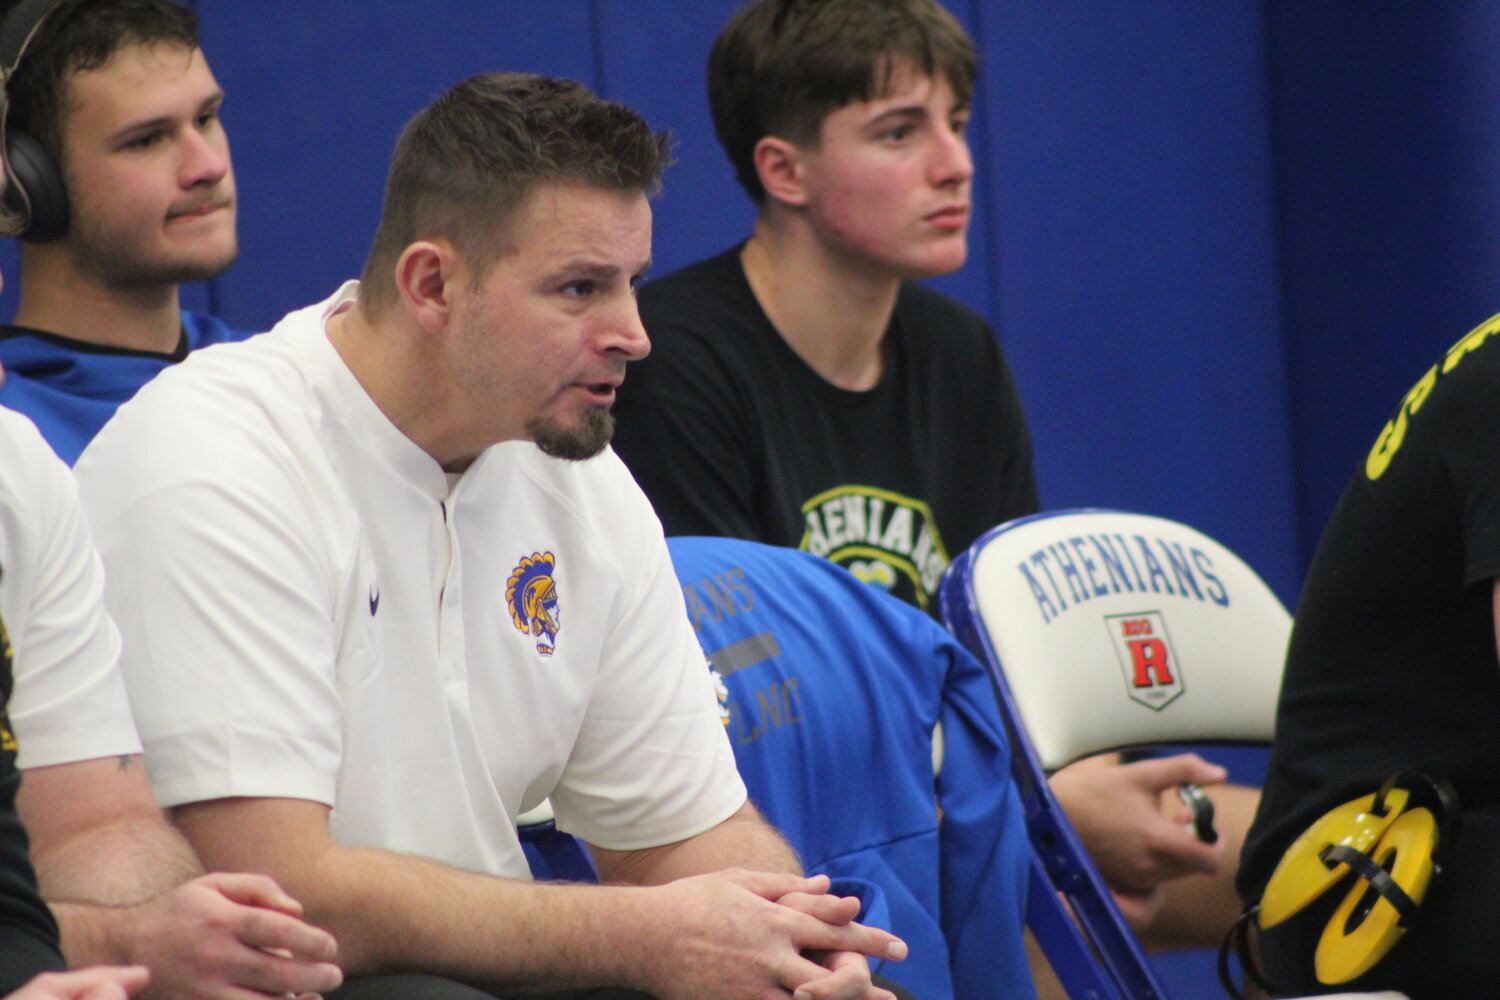 Crawfordsville coach Aaron Keller intensely looks on during his teams match against Southmont.